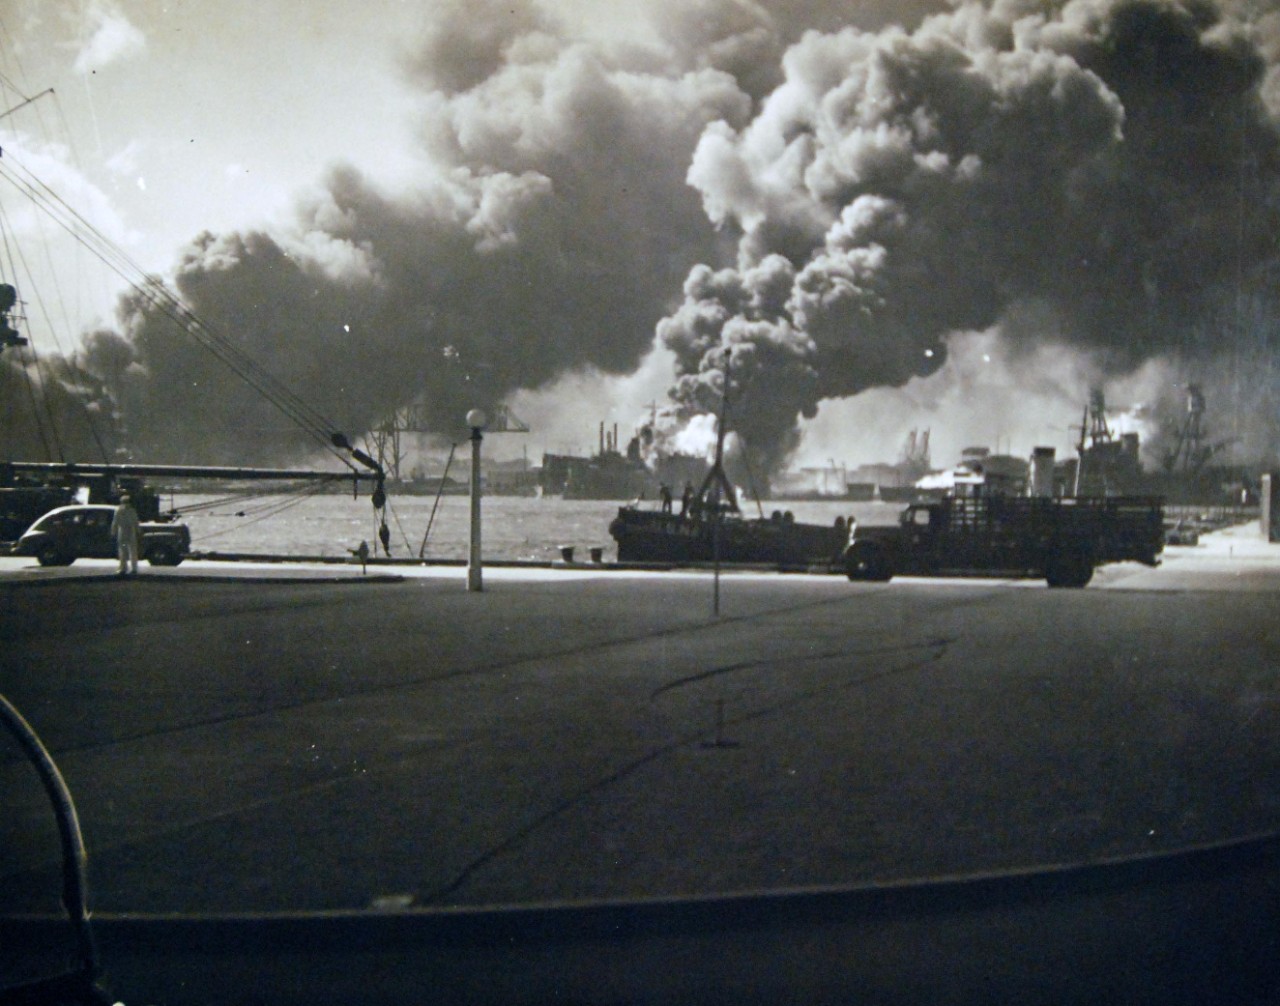 <p>80-G-32577: Japanese Attack on Pearl Harbor, December 7, 1941. Burning of the forward magazines of USS Shaw (DD-373), in the floating drydock YFD-2, after a bombing attack by Japanese planes.&nbsp;</p>
